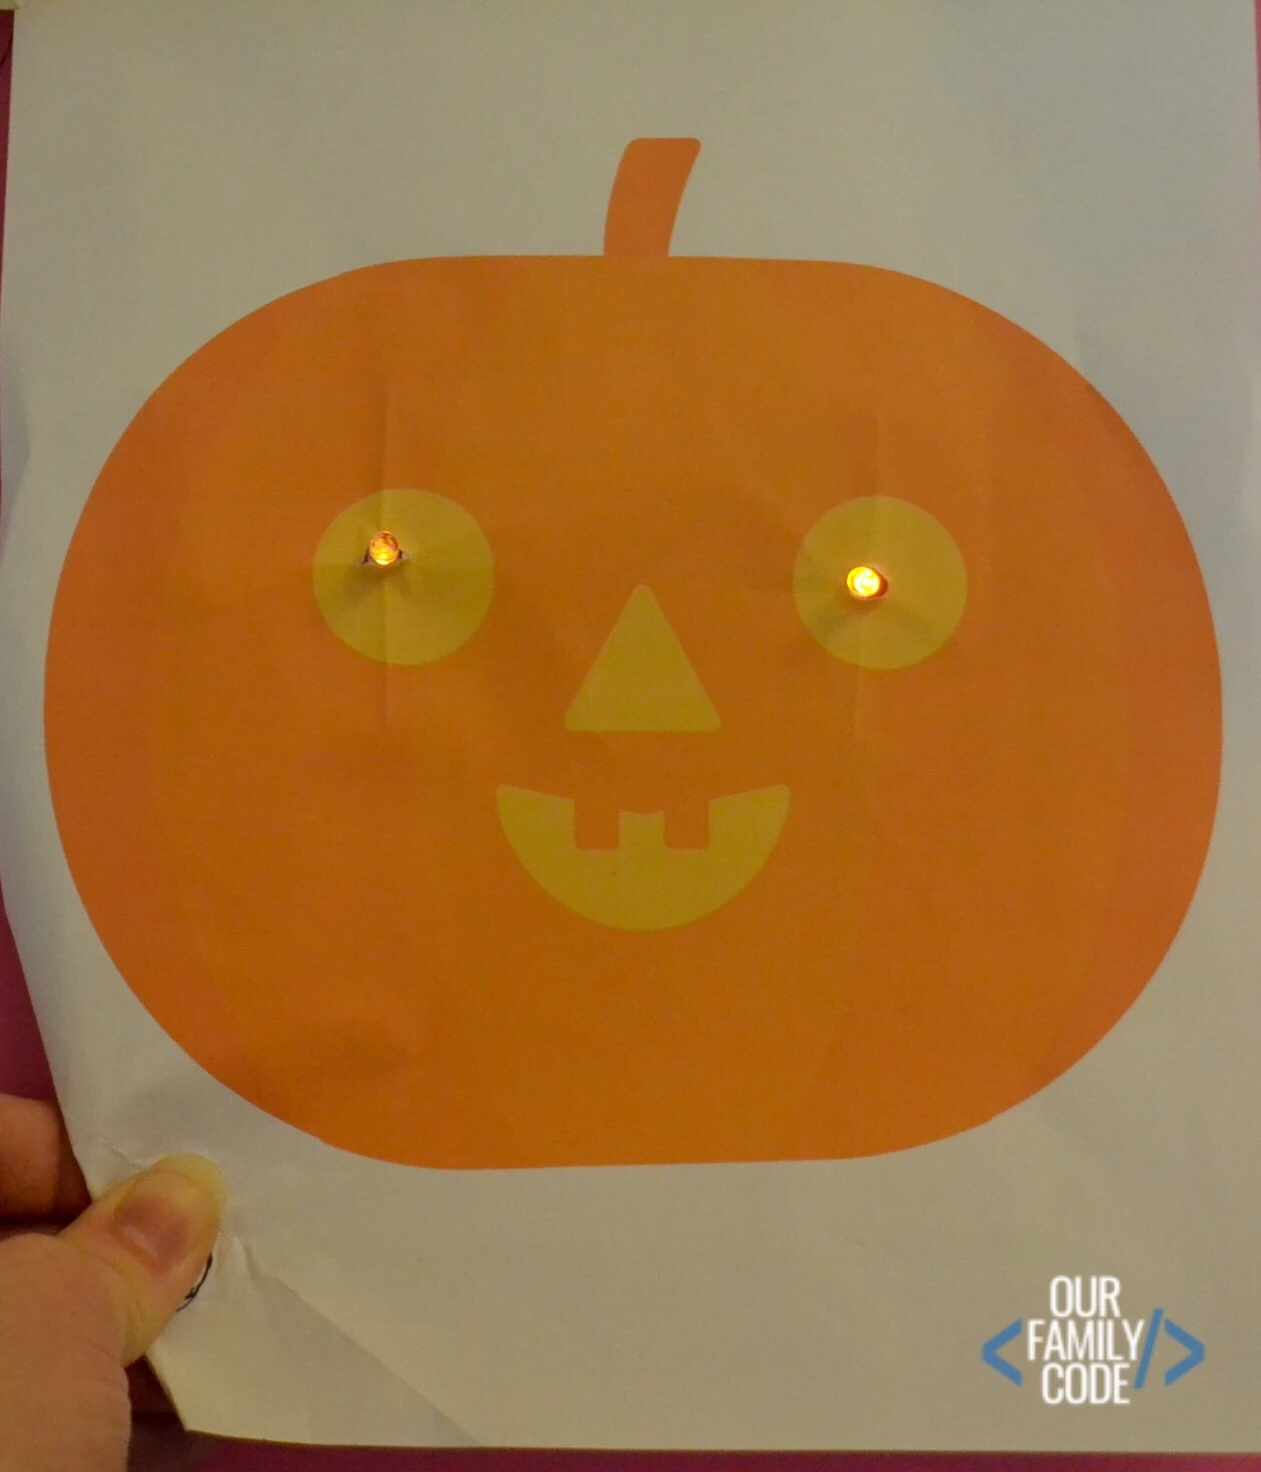 Pumpkin Paper Circuits Check out these Thanksgiving crafts and activities for kids with Thanksgiving STEM challenges, fall coding worksheets, and more!